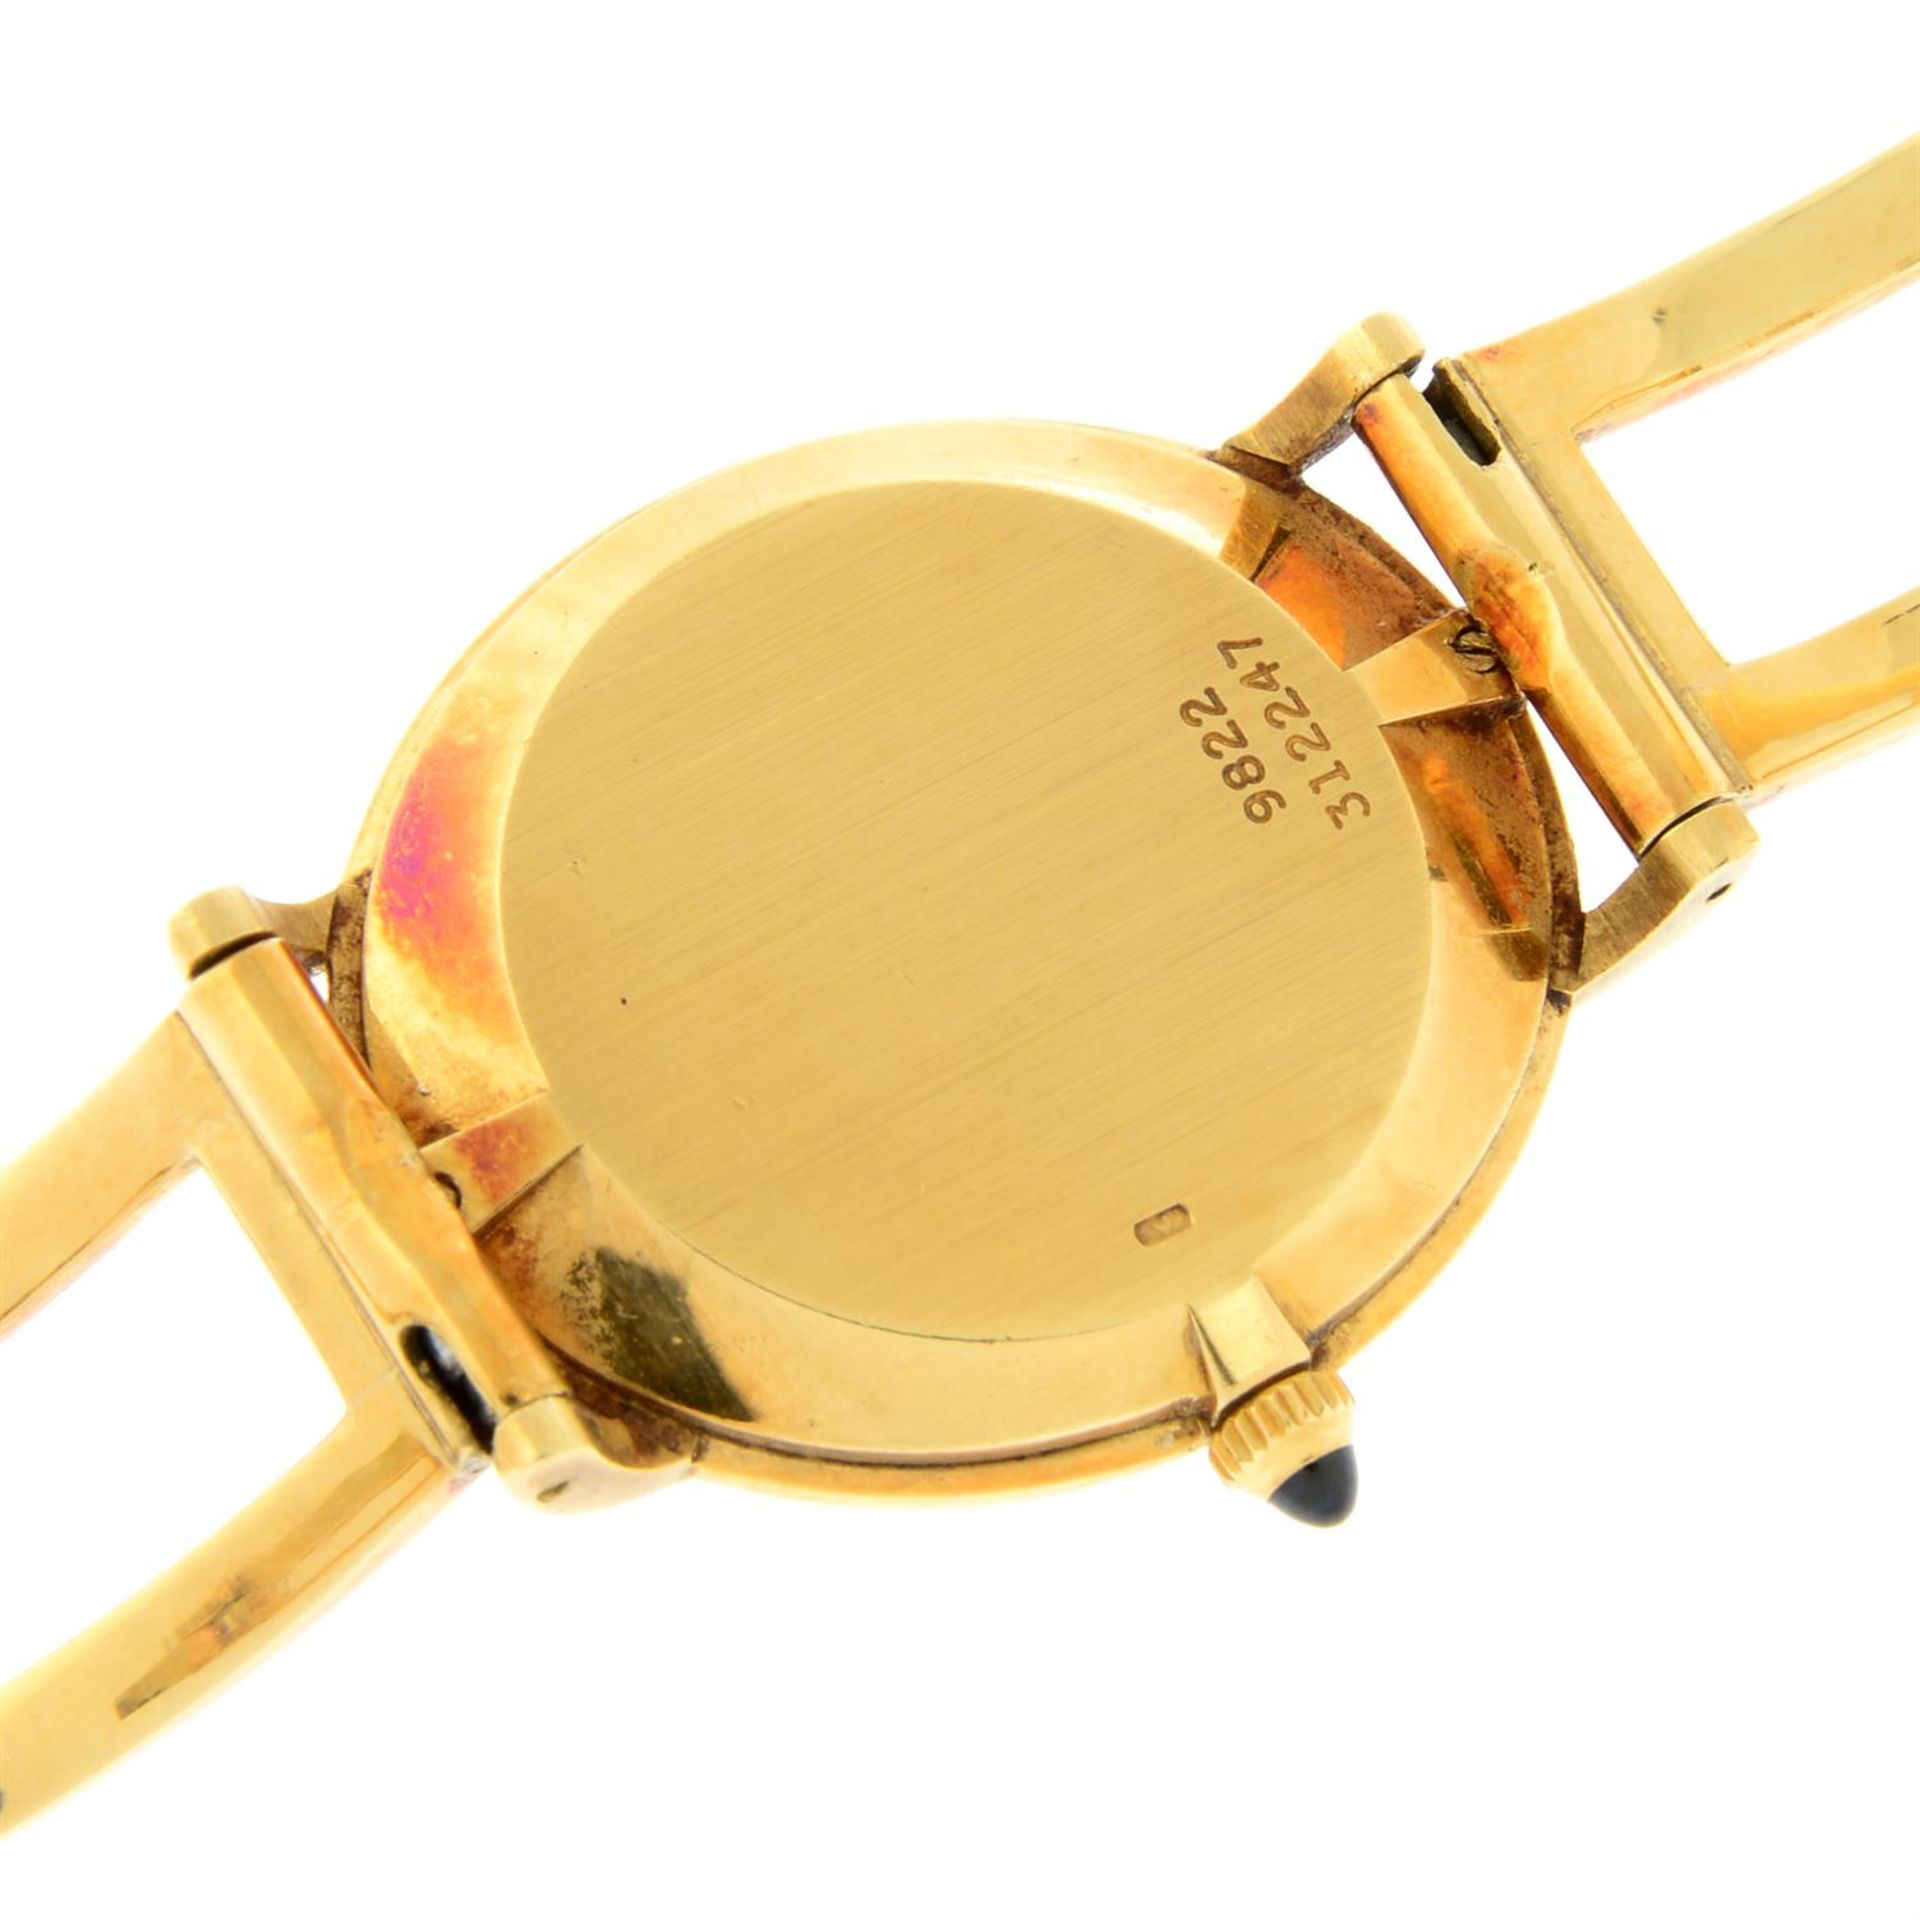 PIAGET - a yellow metal Classic Lady bangle watch, 24mm. - Image 4 of 5